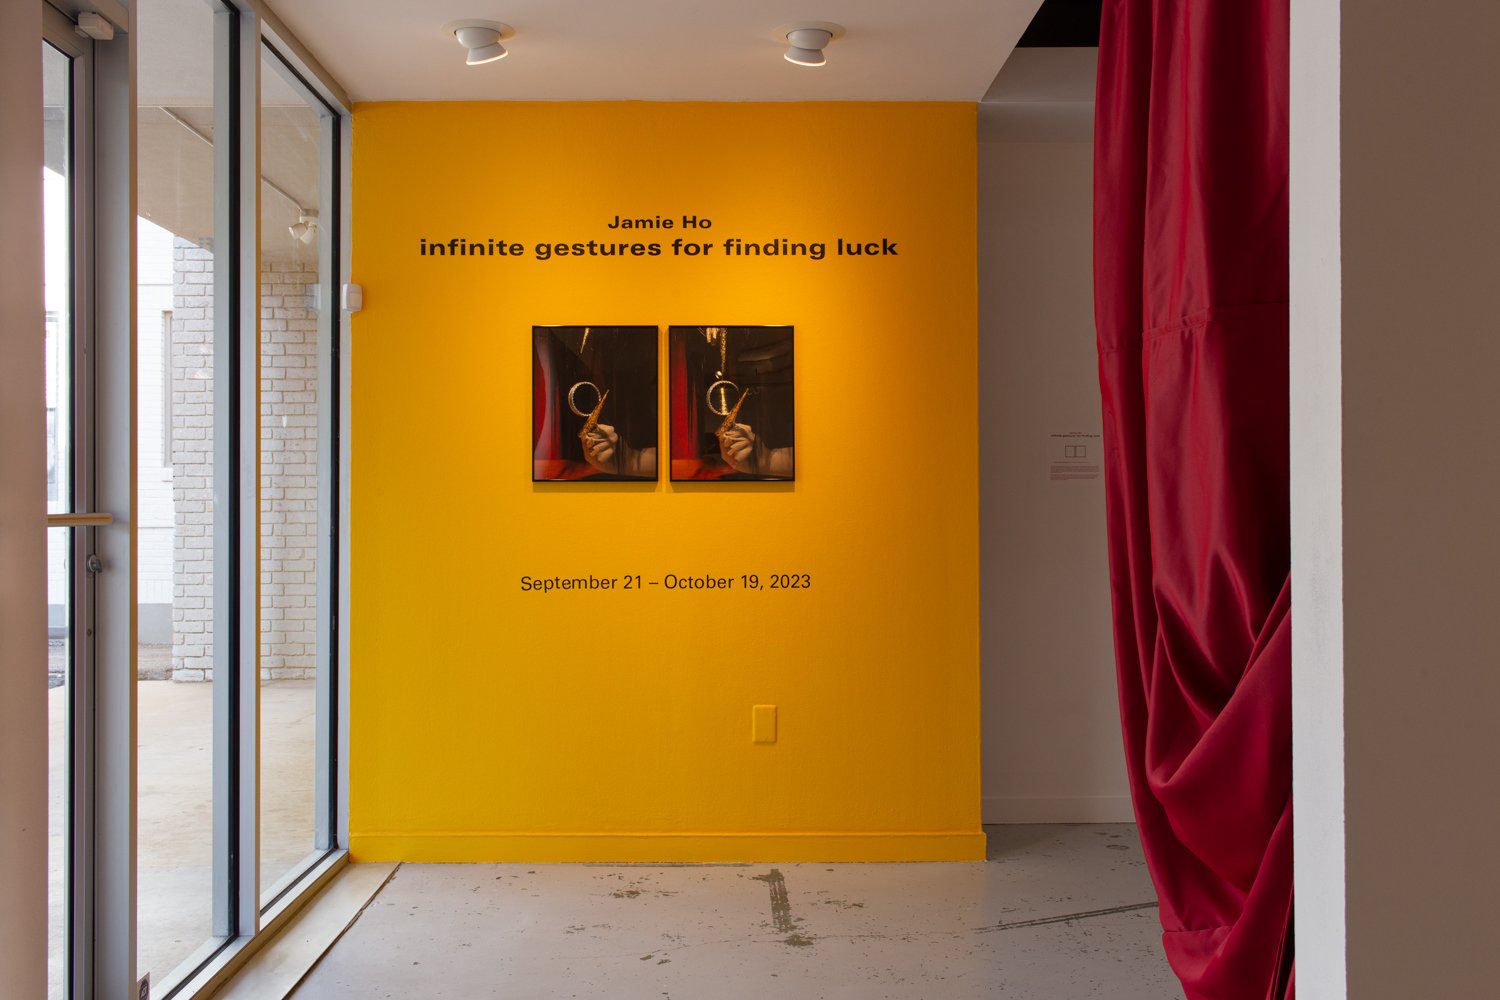  Documentation from  infinite gestures for finding luck,  Houston Center for Photography, Houston, TX, 2023 